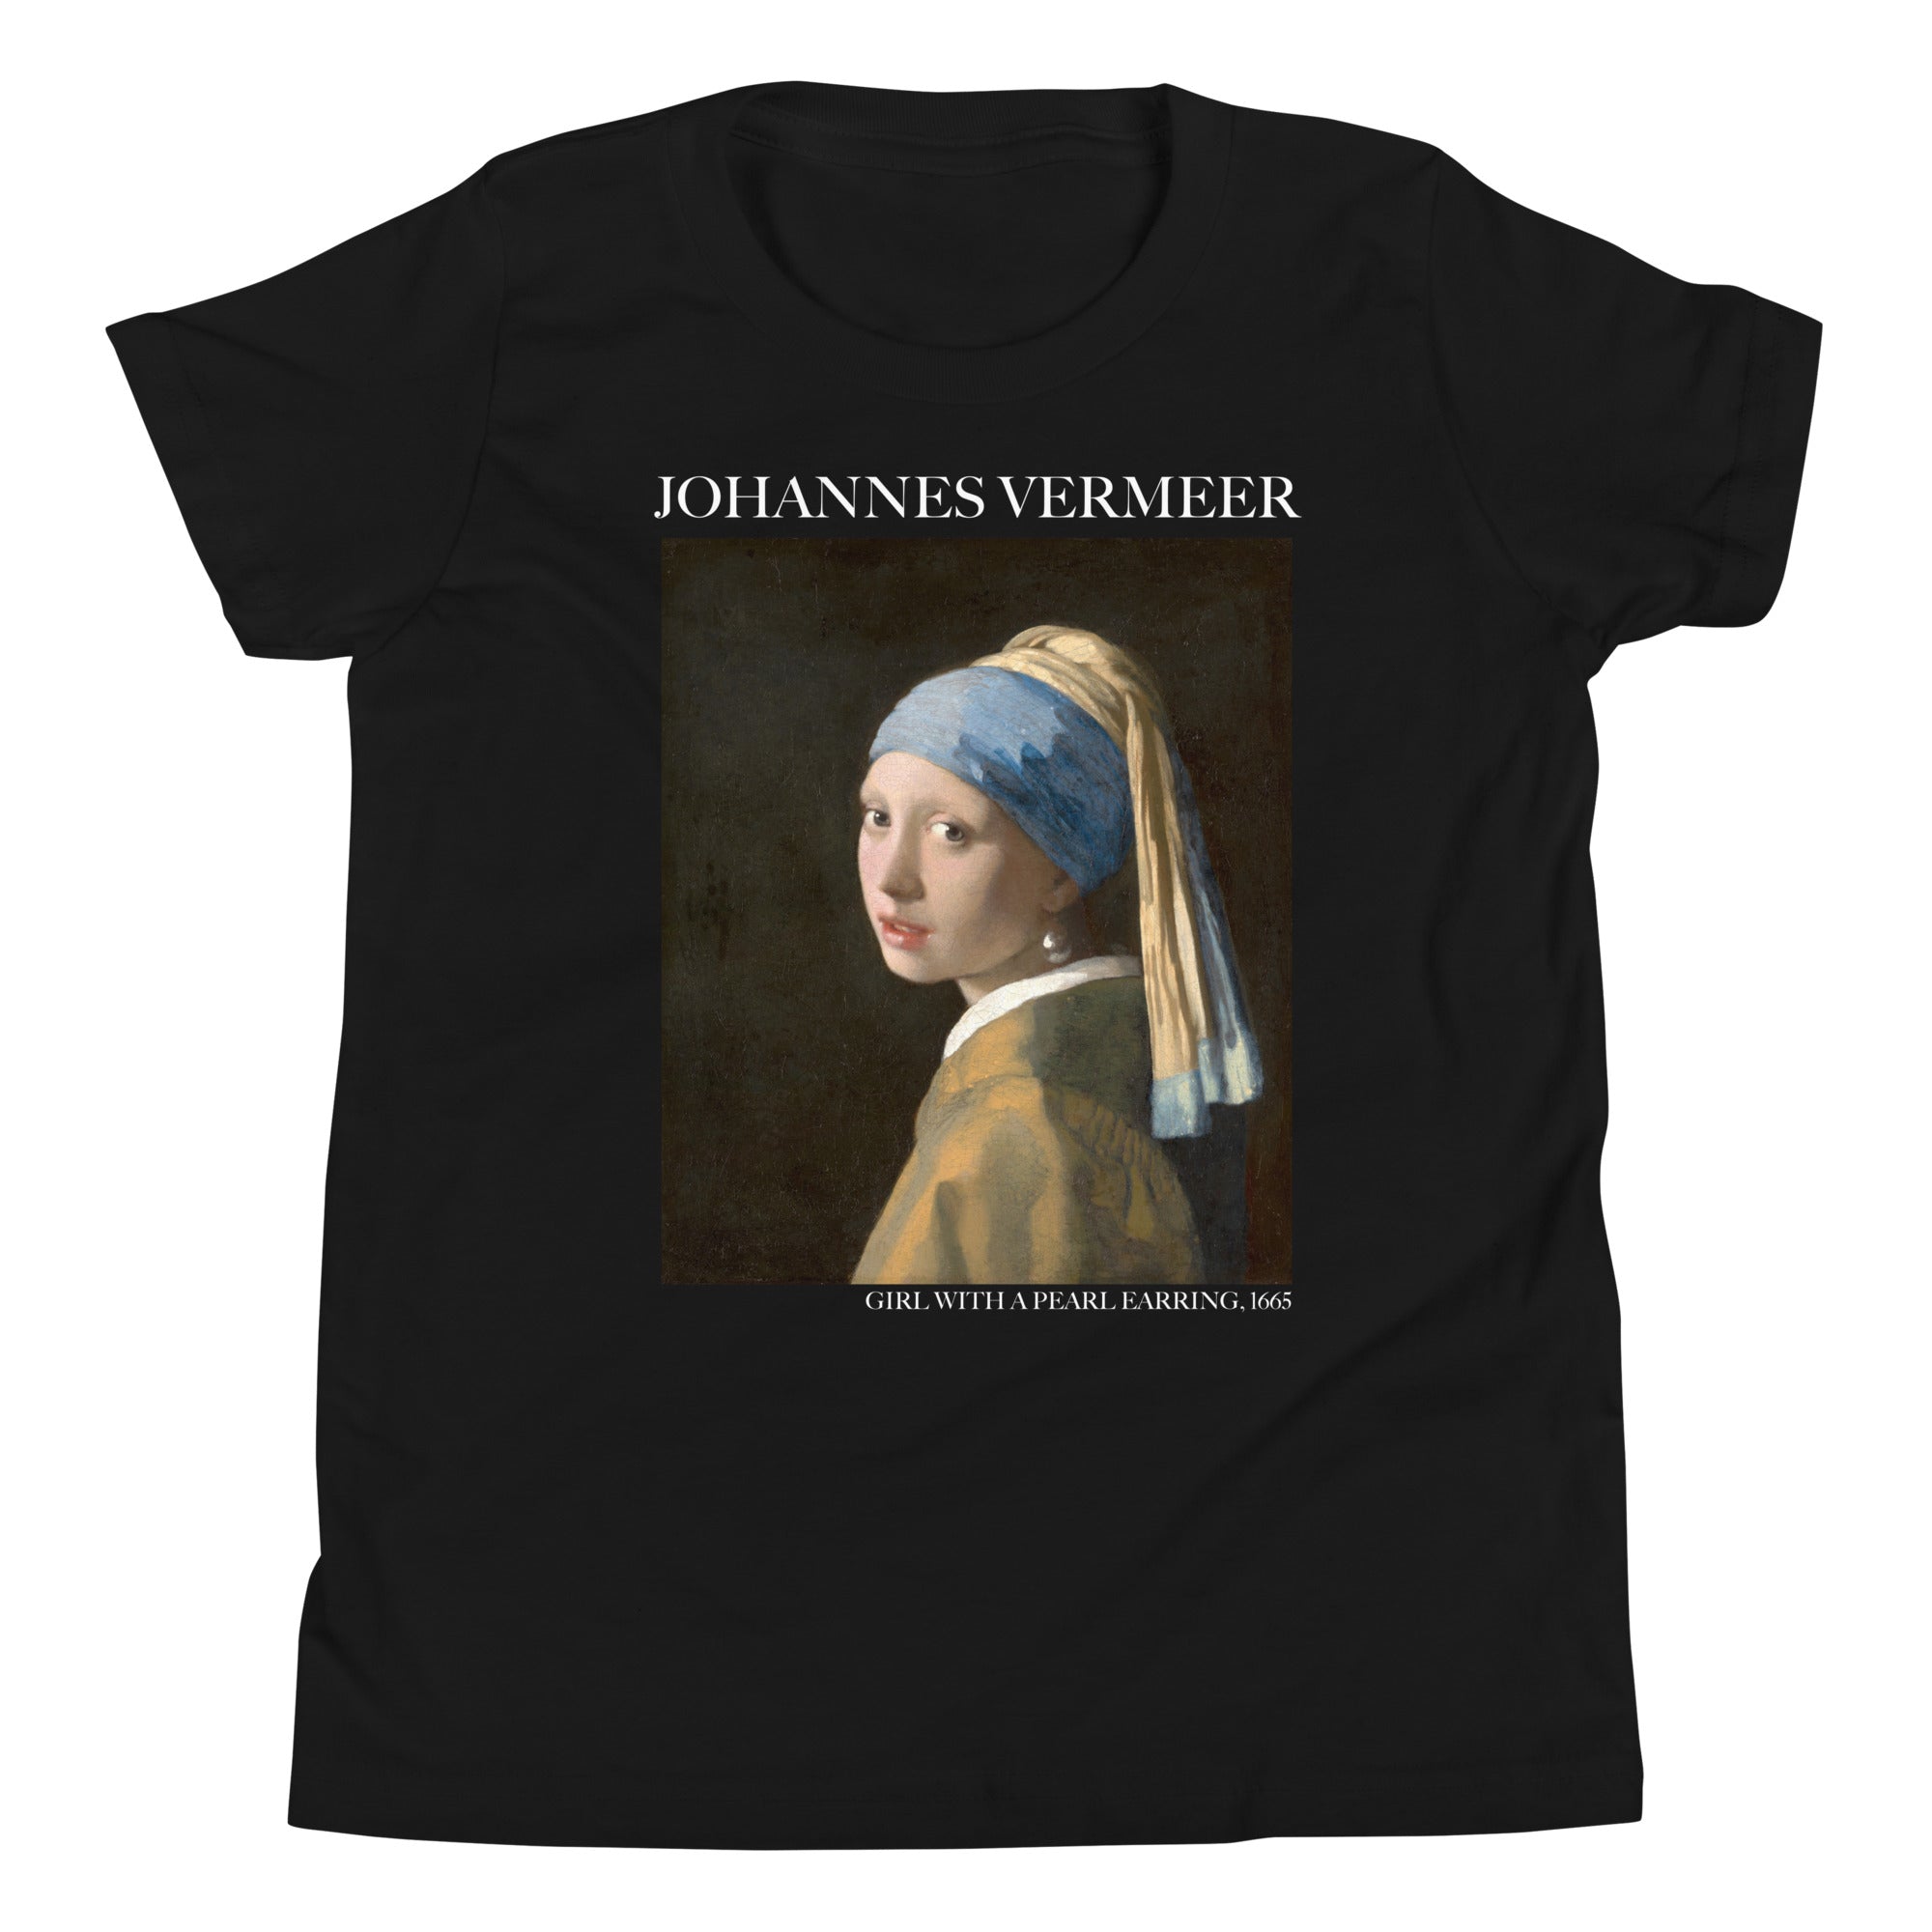 Johannes Vermeer 'Girl with a Pearl Earring' Famous Painting Short Sleeve T-Shirt | Premium Youth Art Tee